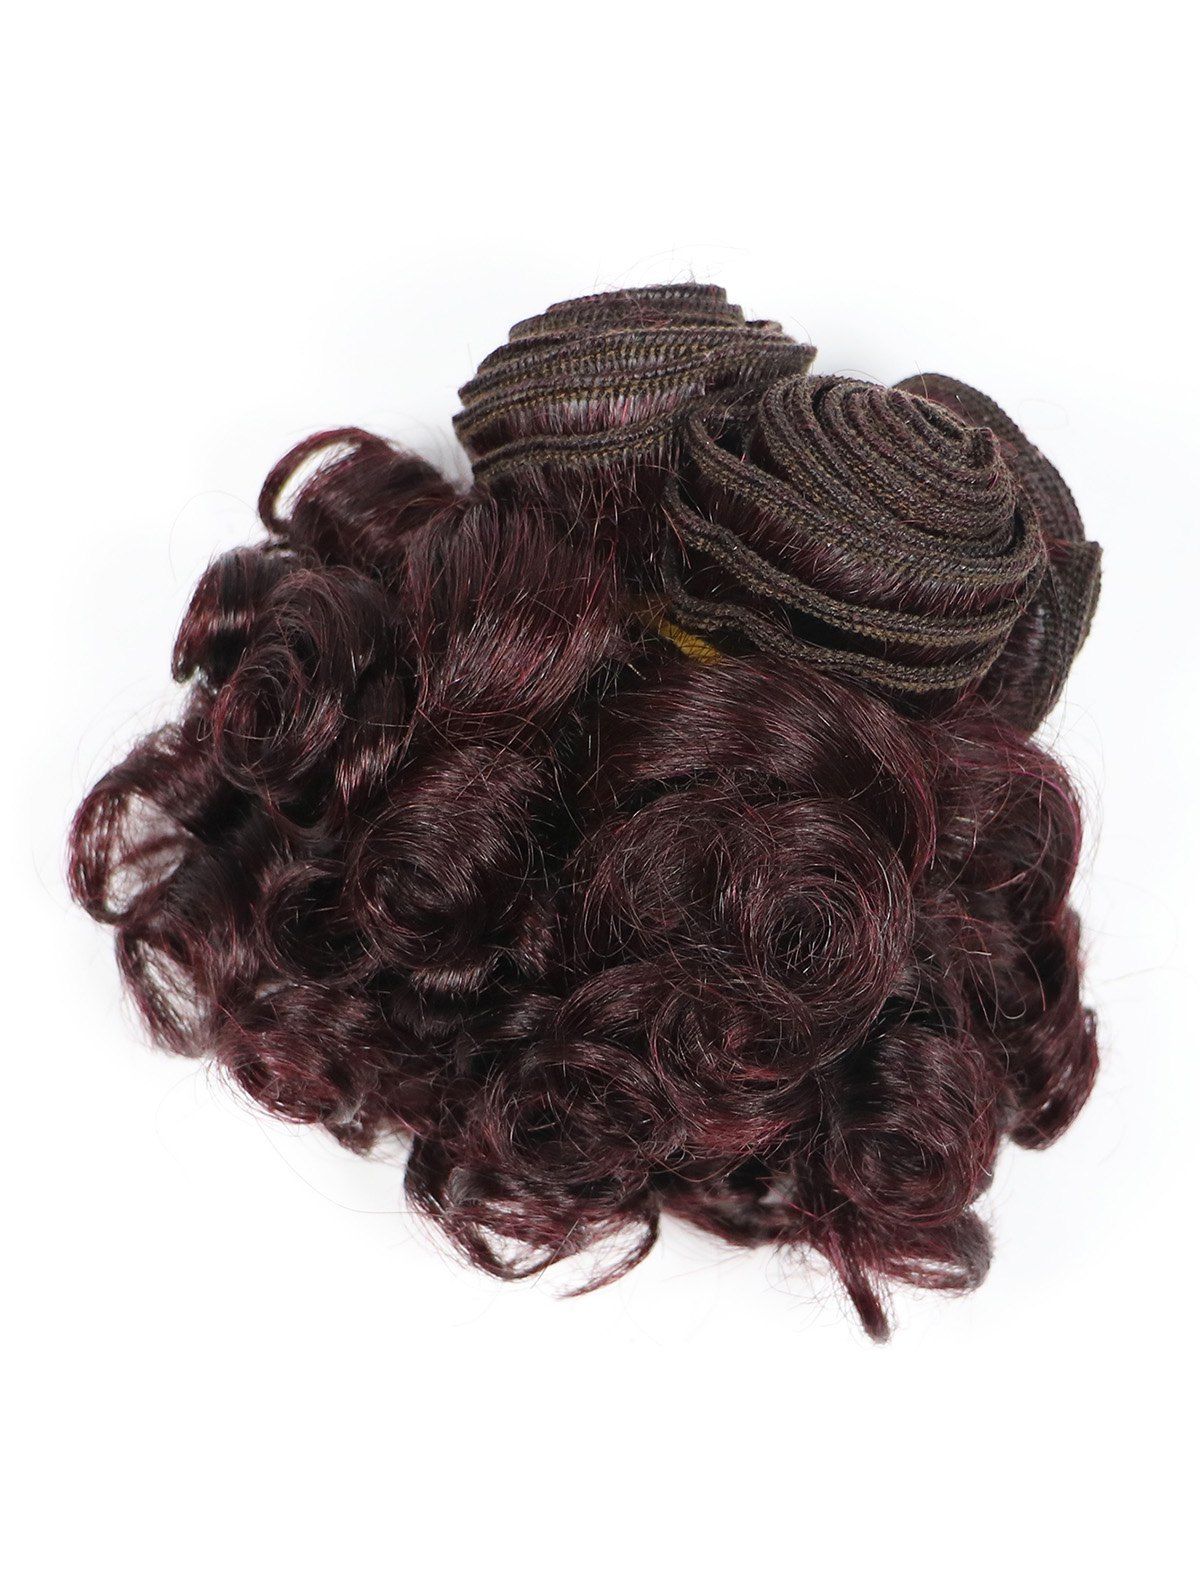 6 Pcs Curly Human Hair Weft - DEEP RED 8INCH